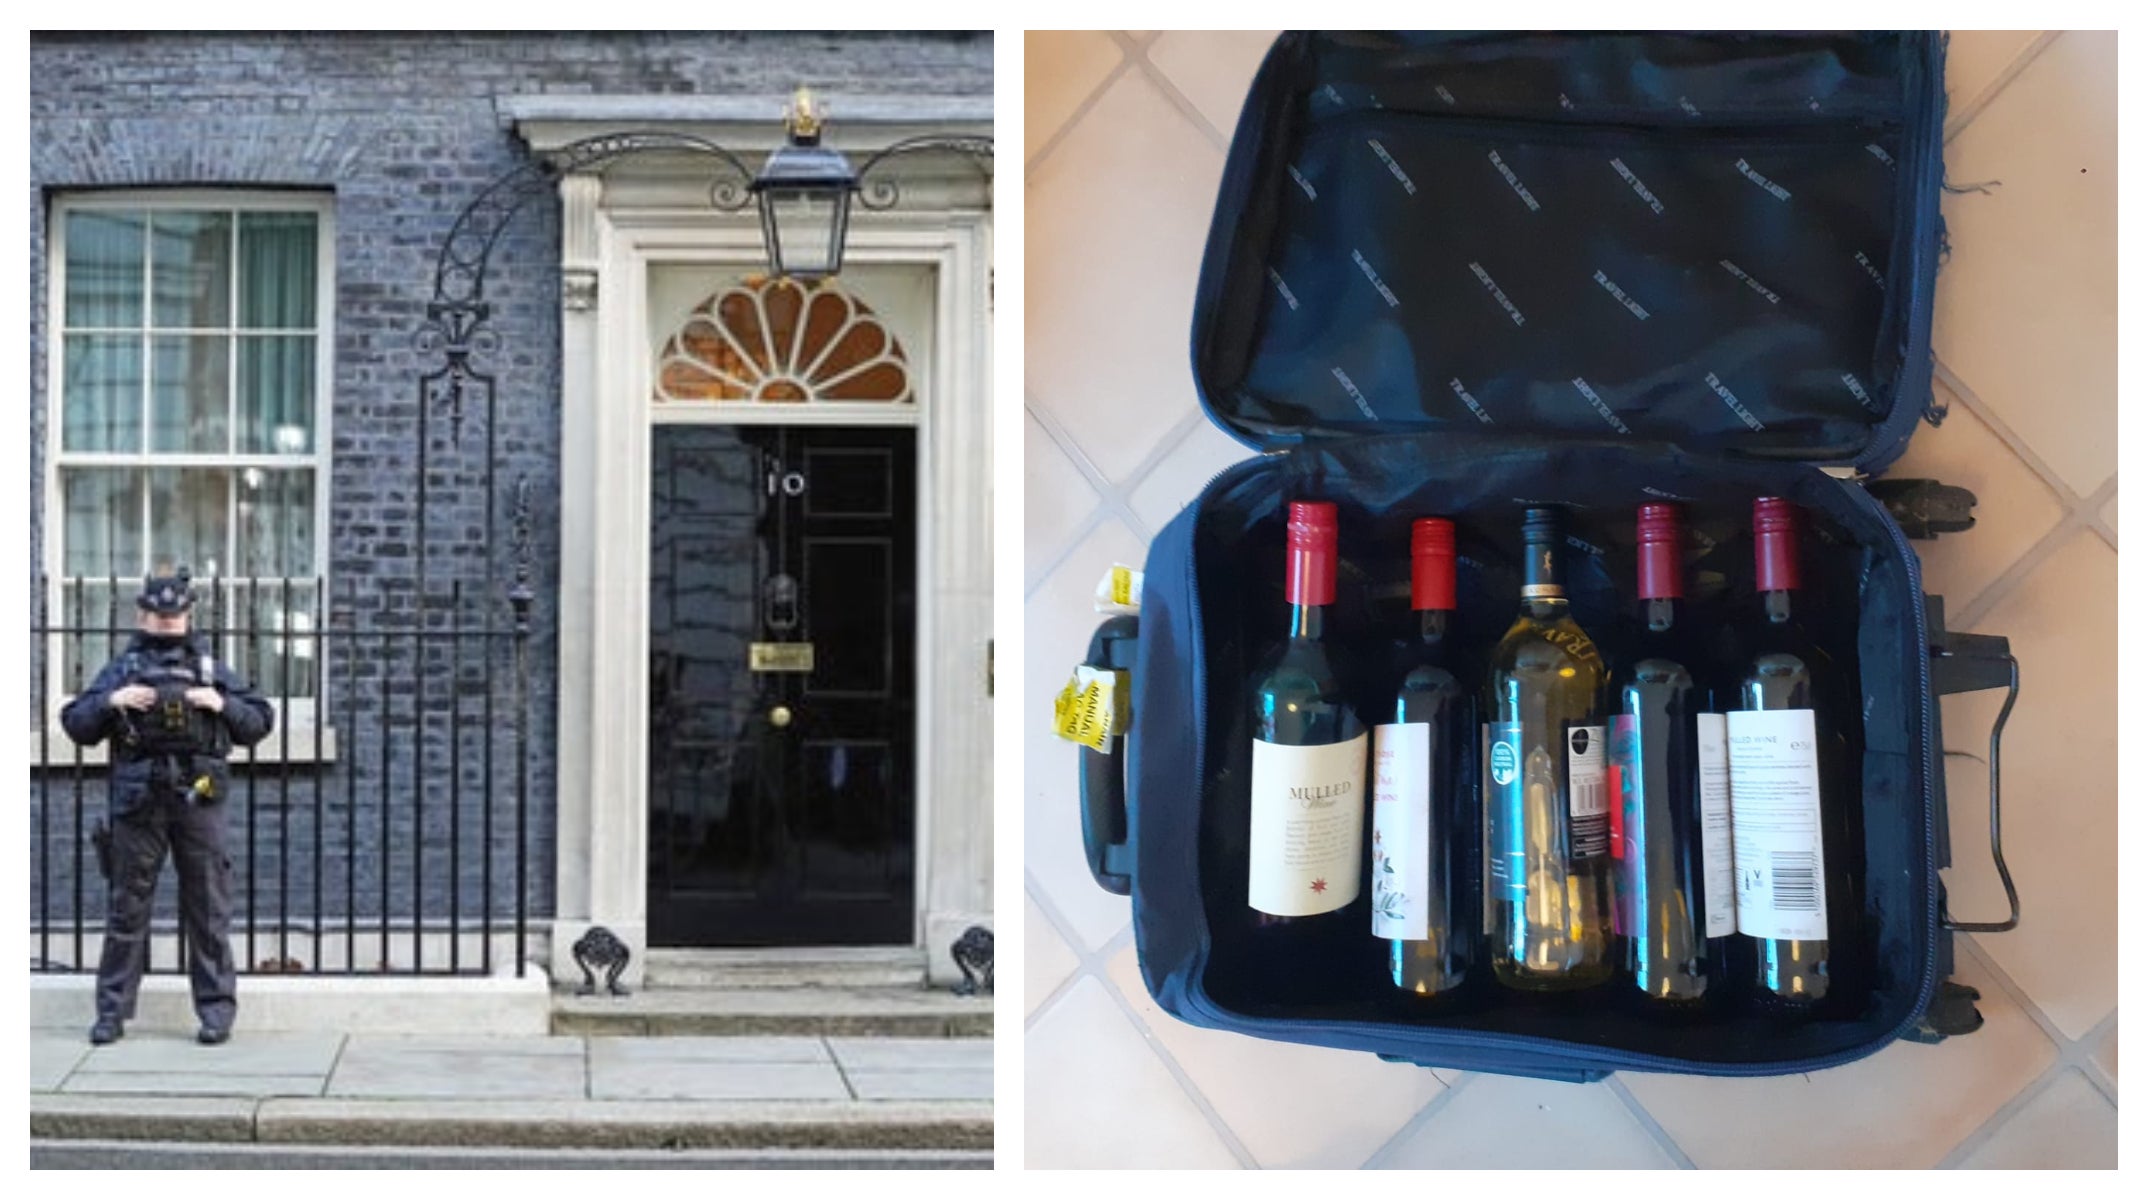 Downing Street Partygate: How many bottles of wine would it take to fill a suitcase?